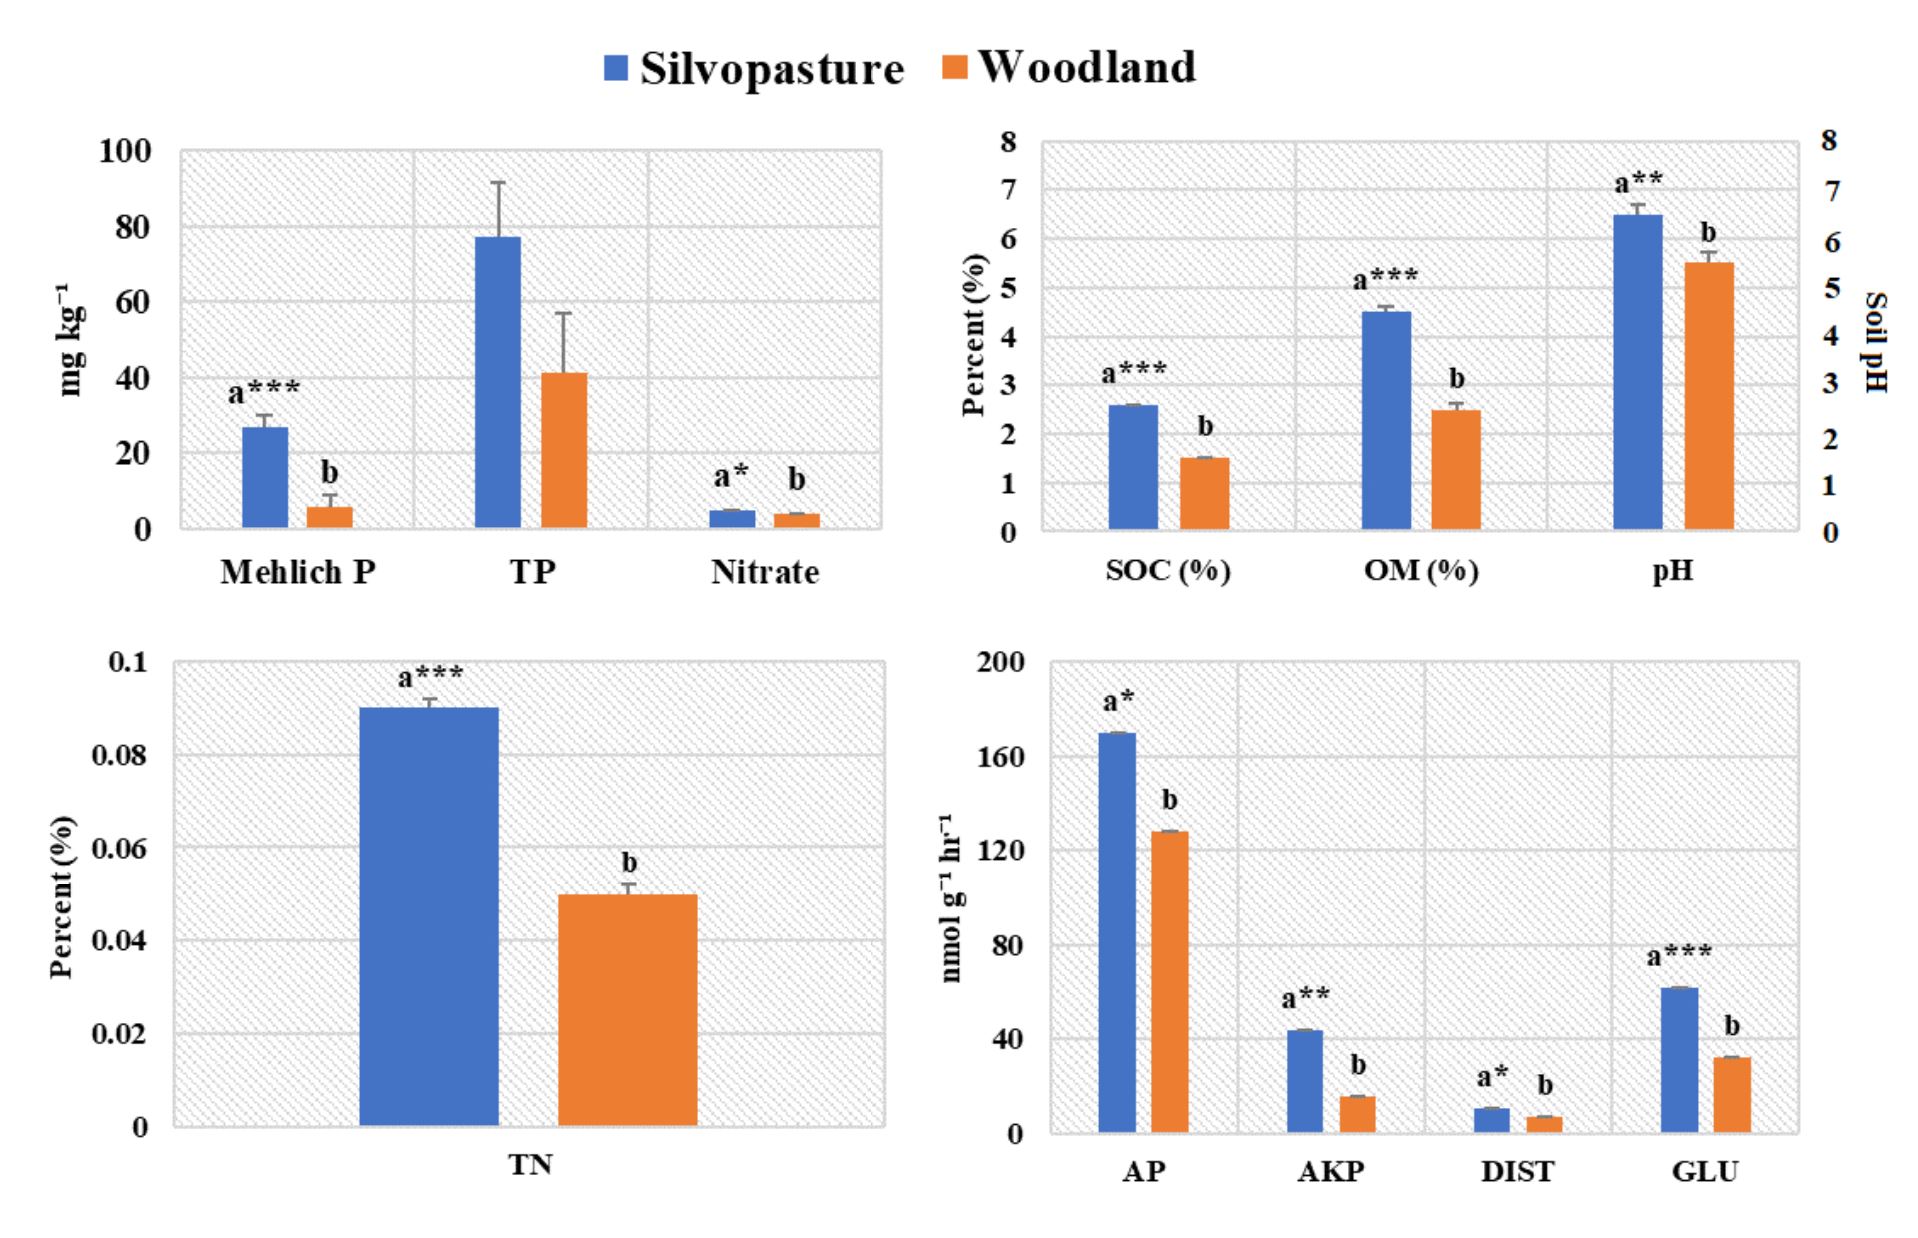 Figure 2 Soil physiochemical properties and enzyme activities in woodland and silvopasture land-use systems.  abc Means with different superscripts in a row differ (*p<0.05, **p<0.01, ***p<0.001).  TP- Total Phosphorus; TN- Total Nitrogen; SOC- Soil Organic Carbon; OM- Organic Matter  AP- acidic phosphatase, AKP- alkaline phosphatase, DIST- phosphodiesterase, and GLU- β-glucosidase